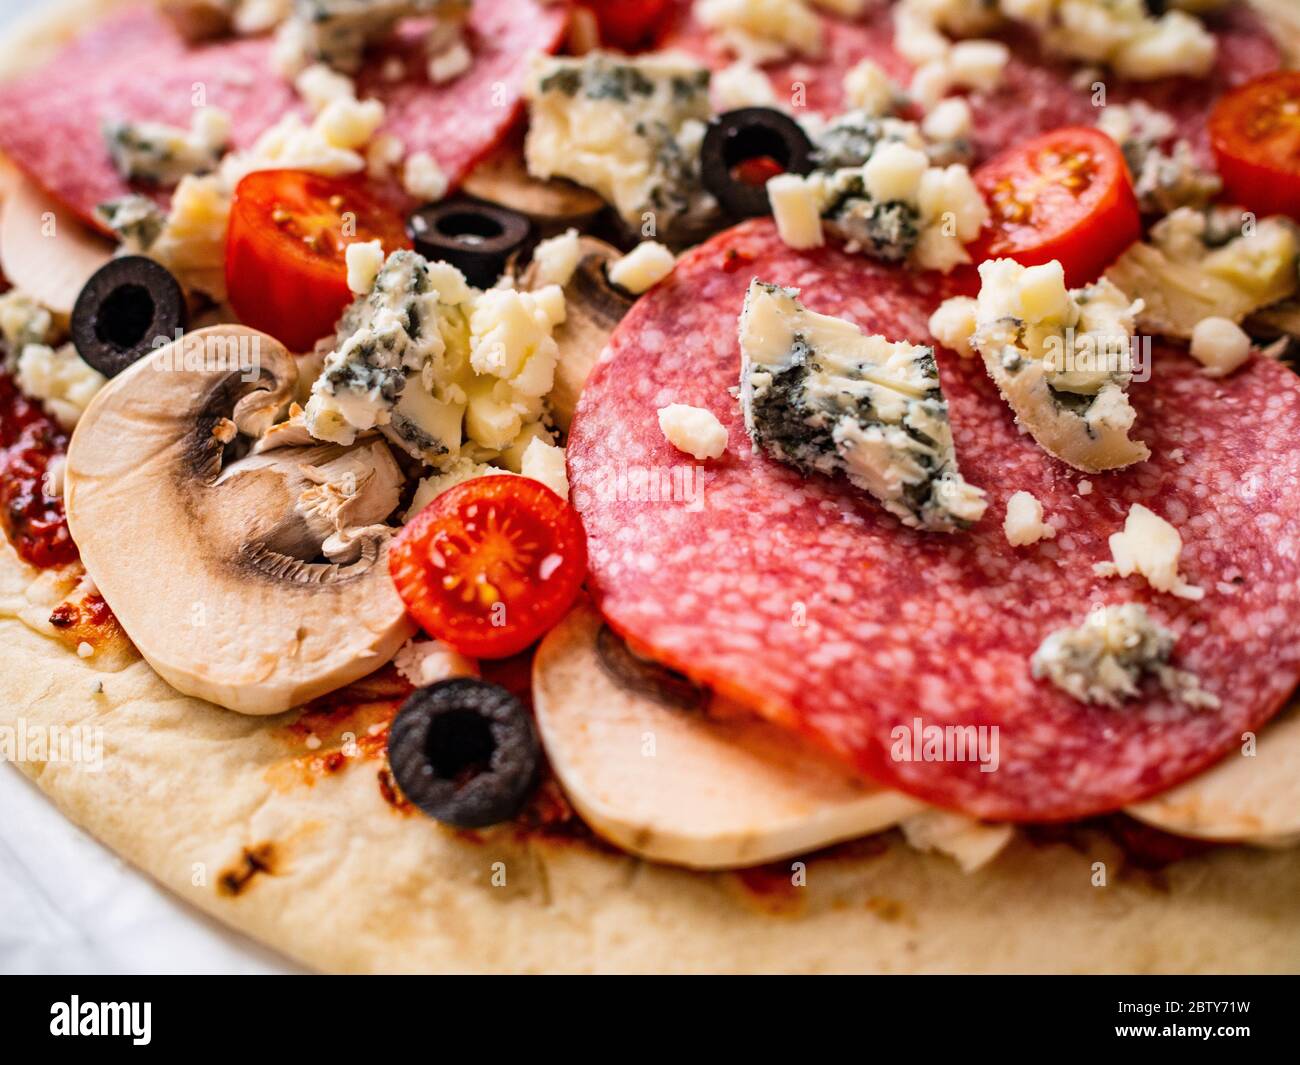 Unbaked pizza with salami, champignon,olives and cherry tomatoes Stock Photo